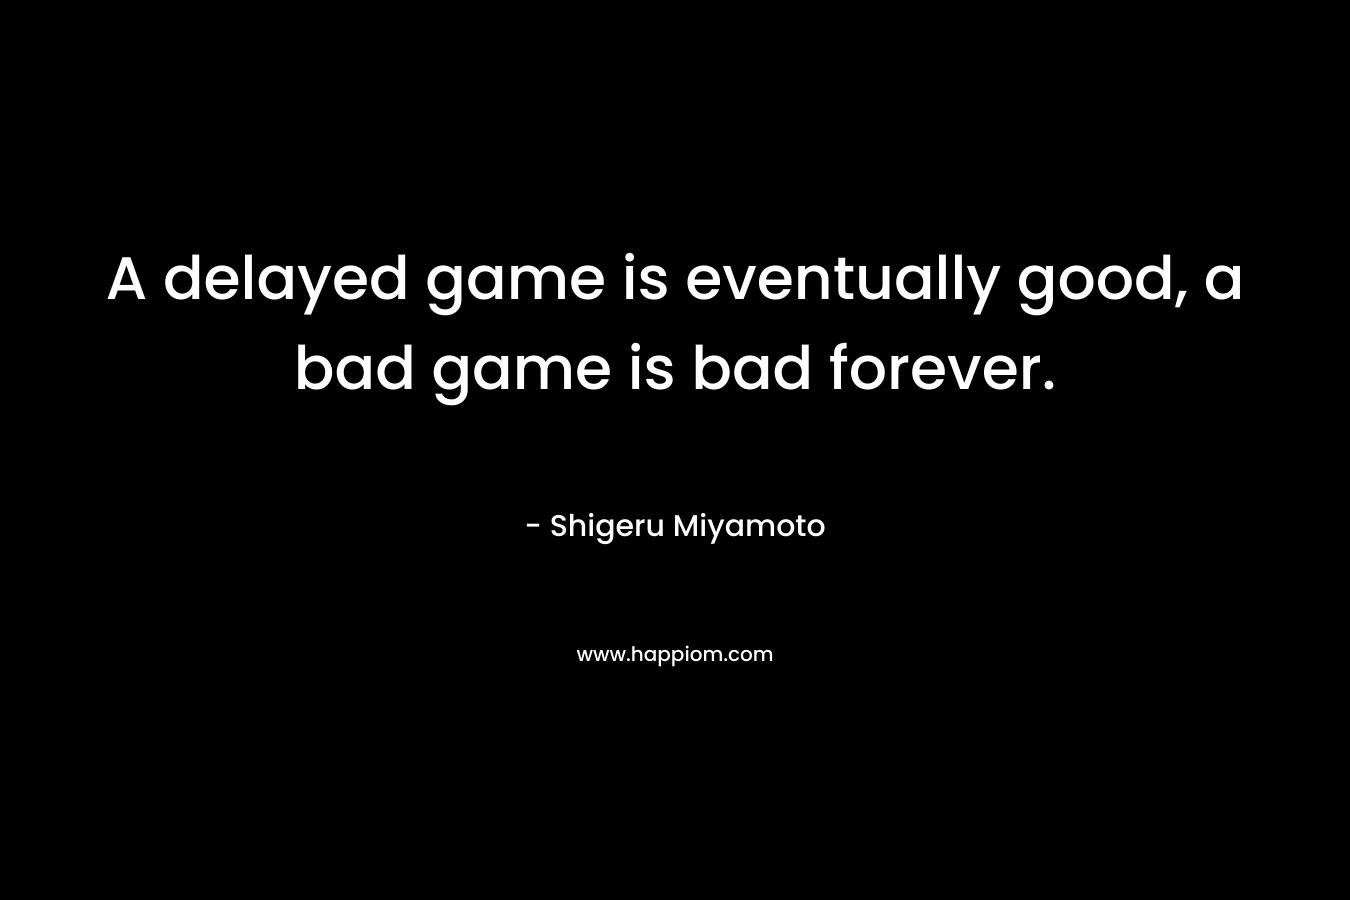 A delayed game is eventually good, a bad game is bad forever.